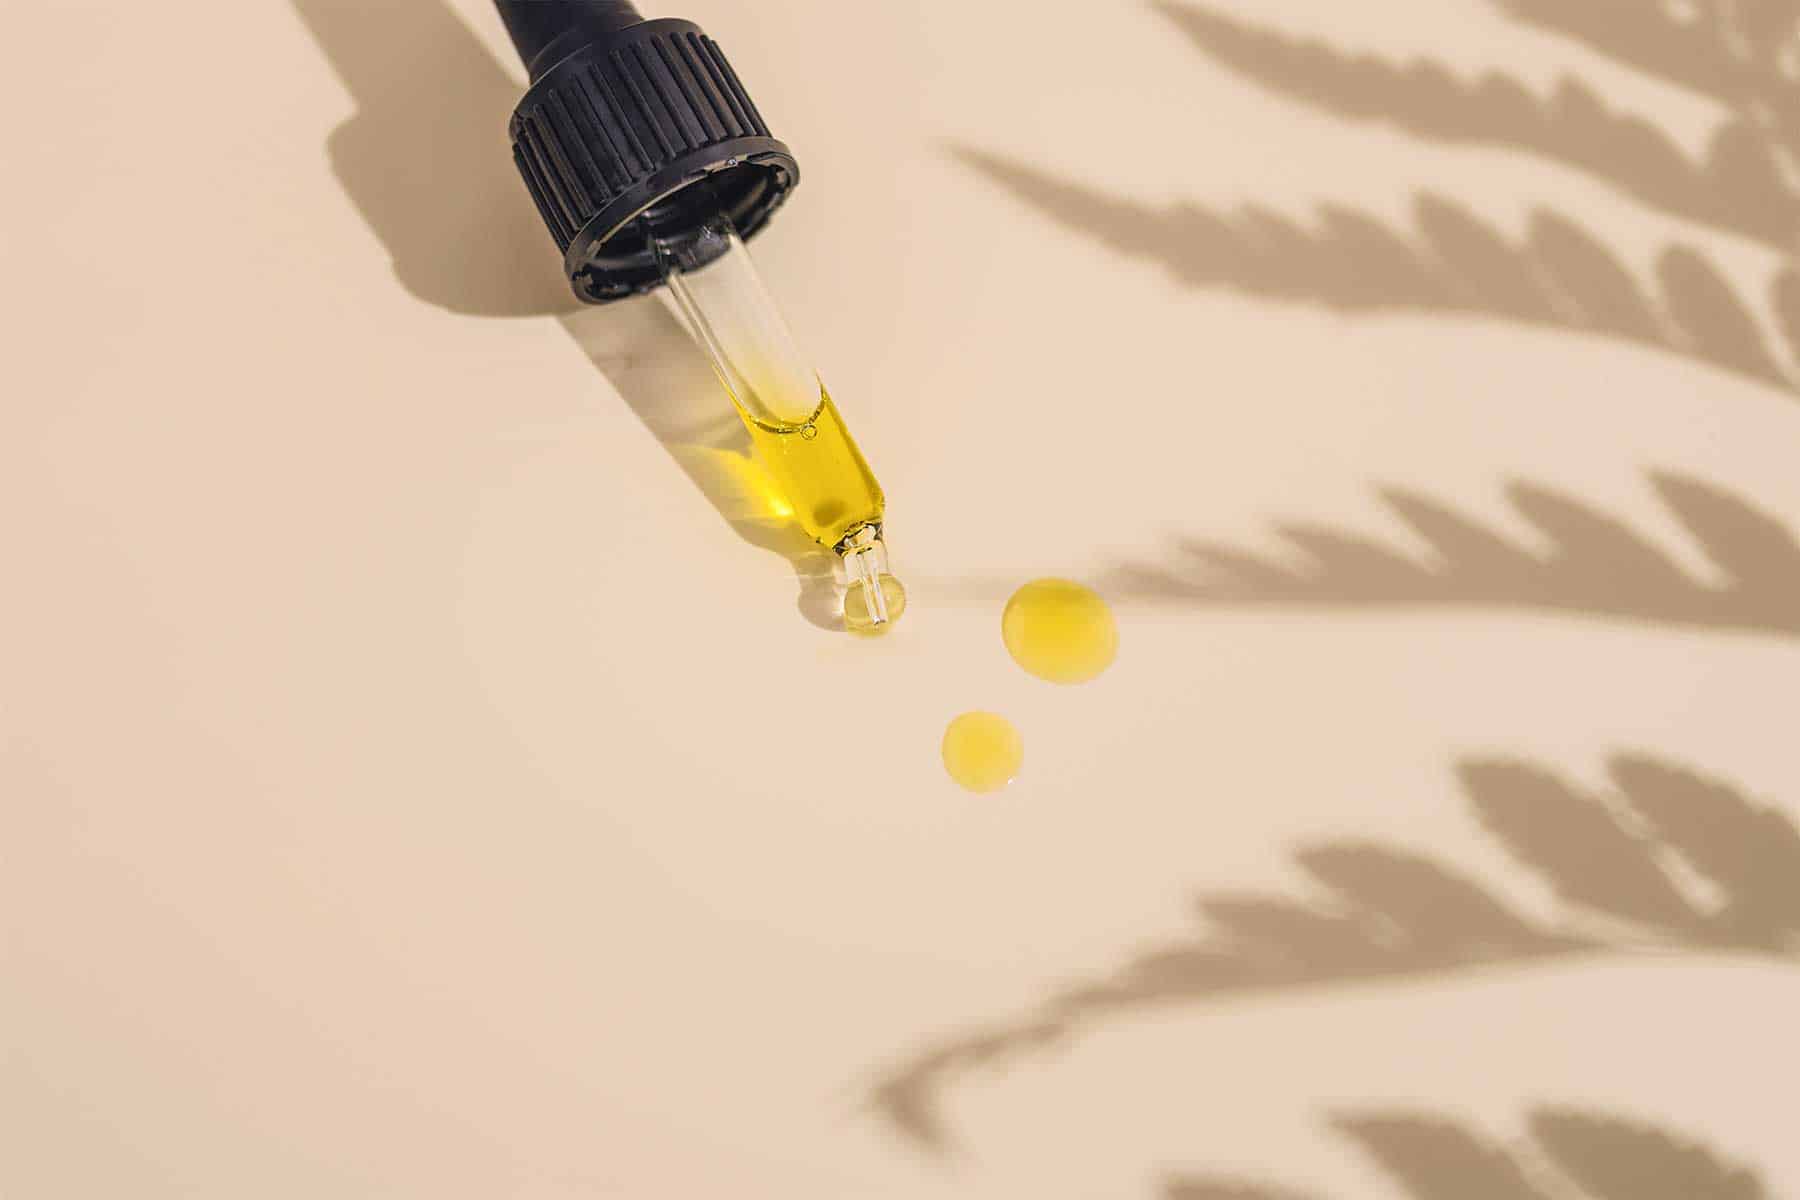 Sublingual Application: The Optimal Way to Use Cannabis Tinctures